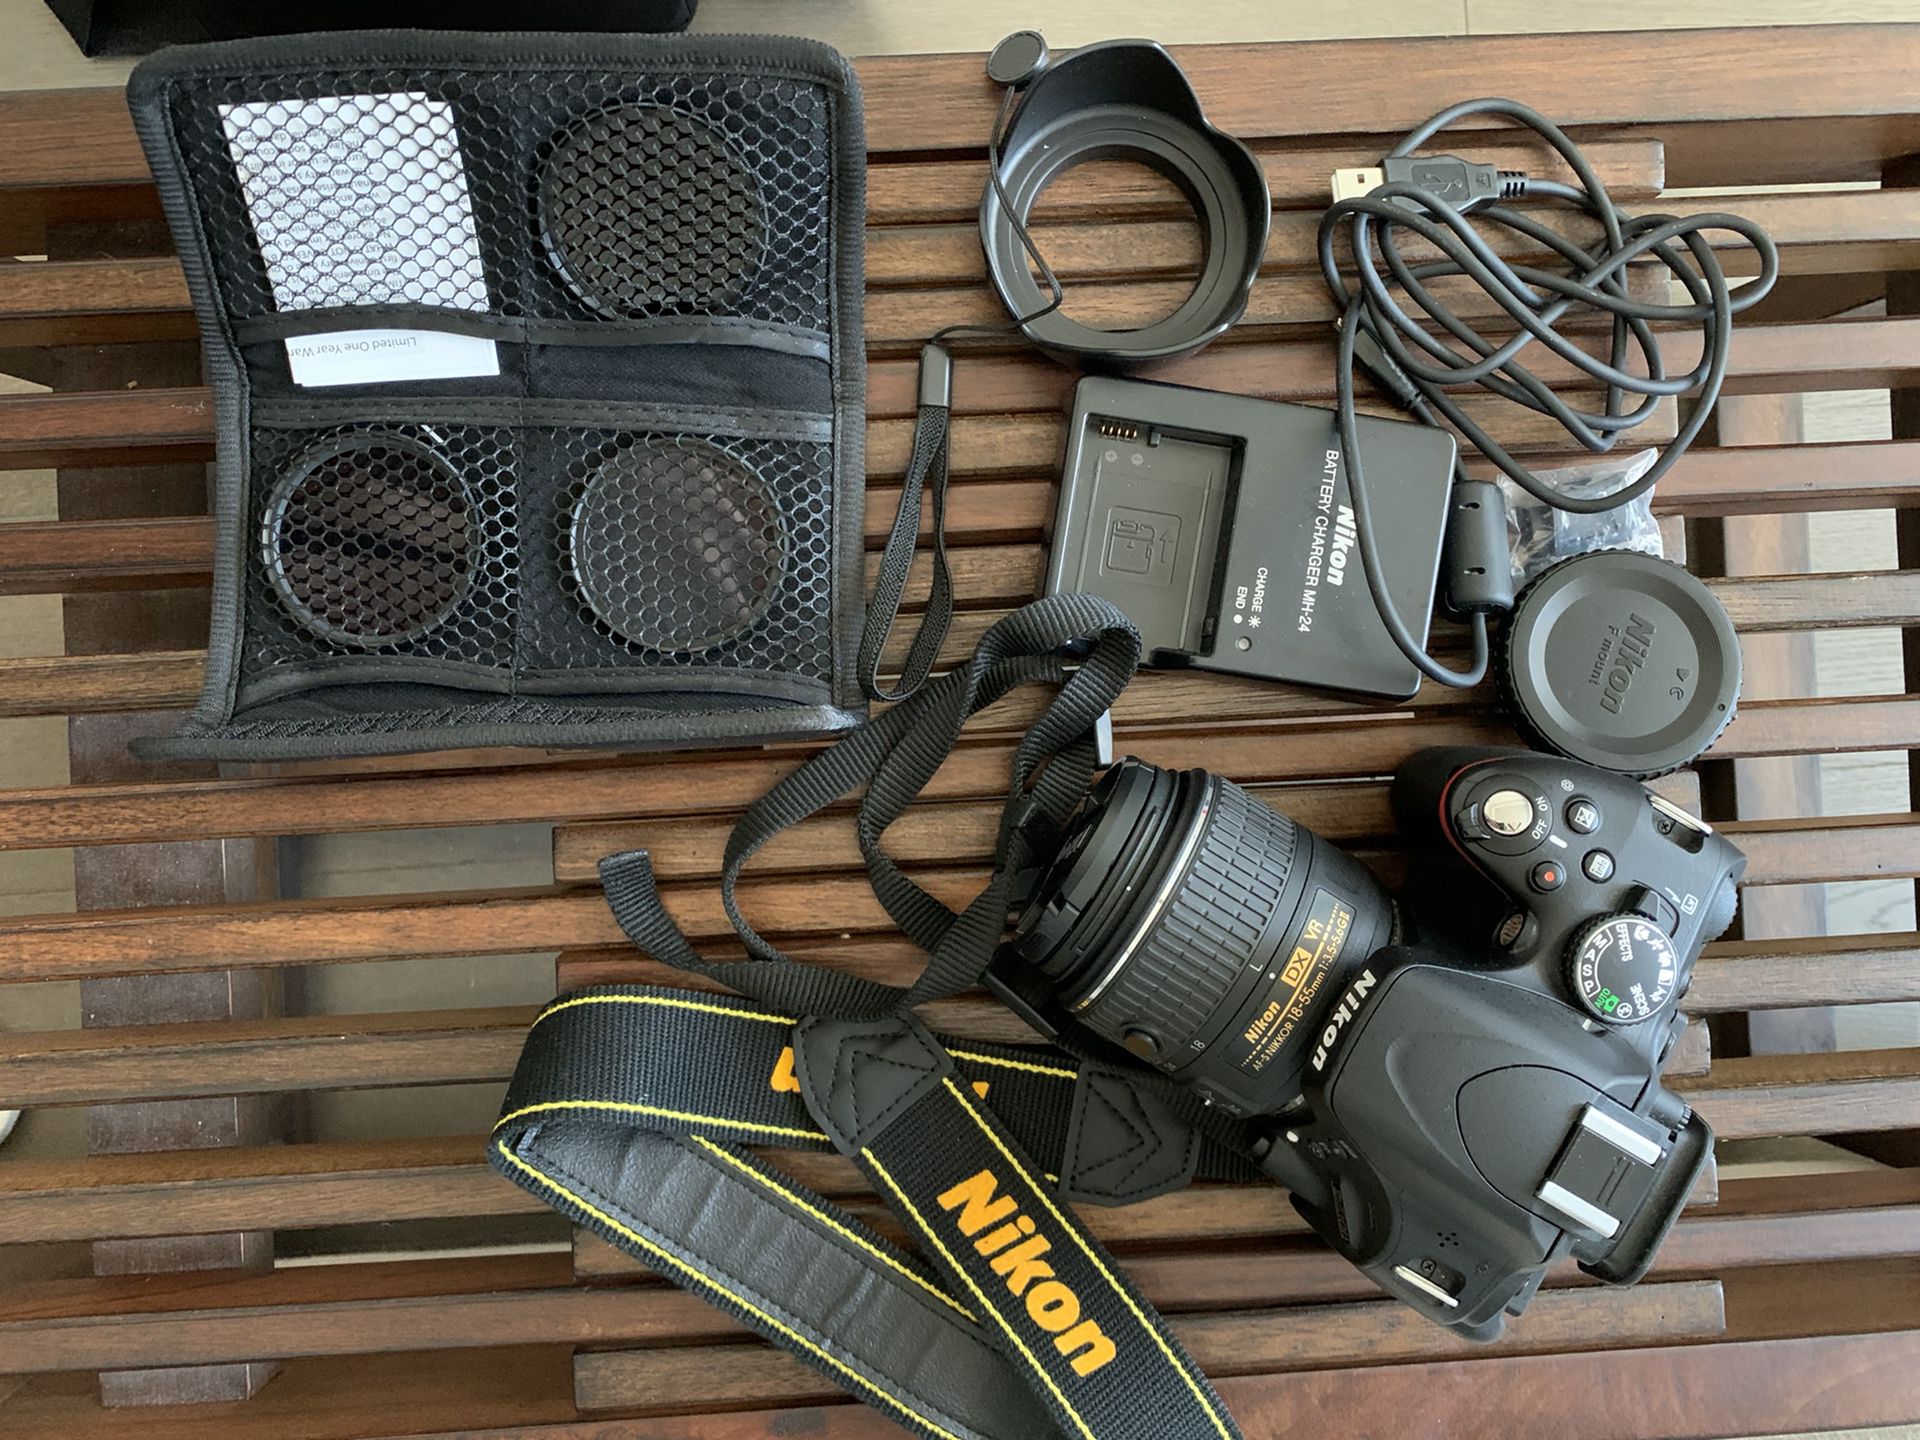 Nikon D5100 Digital Camera with bag and accessories